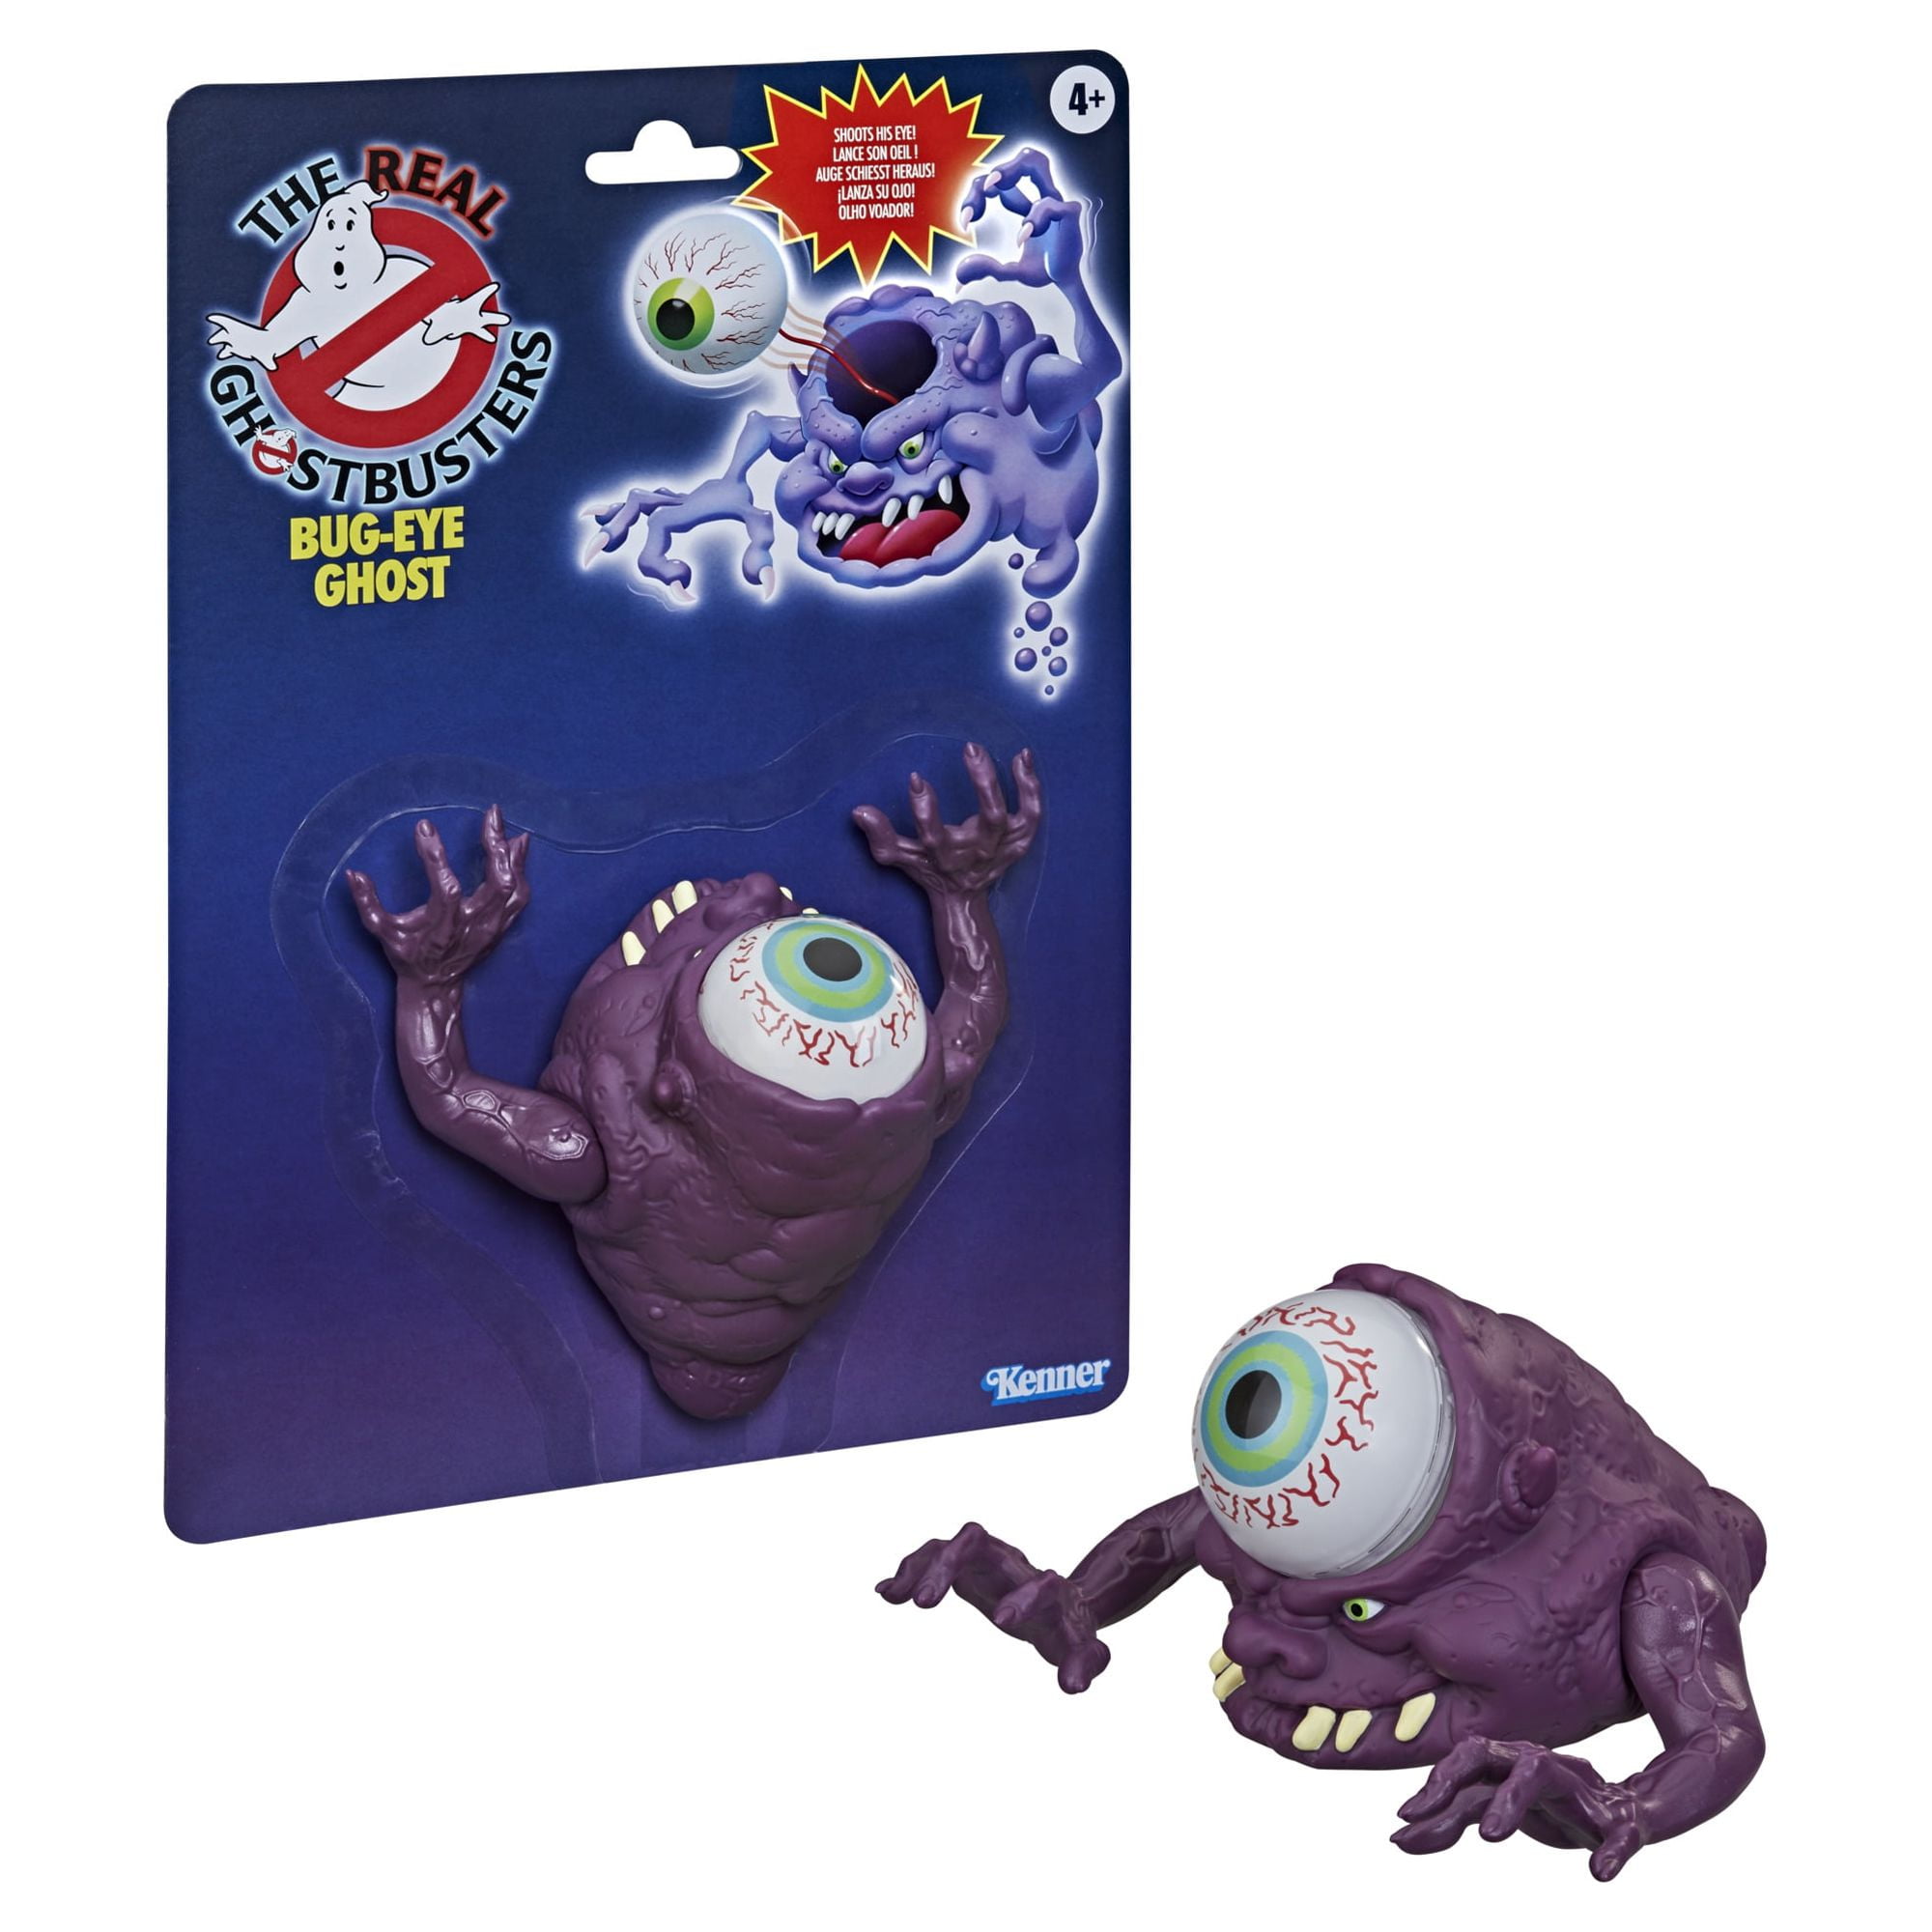 Ghostbusters Kenner Classics The Real Ghostbusters Bug-Eye Ghost Retro Action Figure $4.05 + Free S&H w/ Walmart+ or $35+